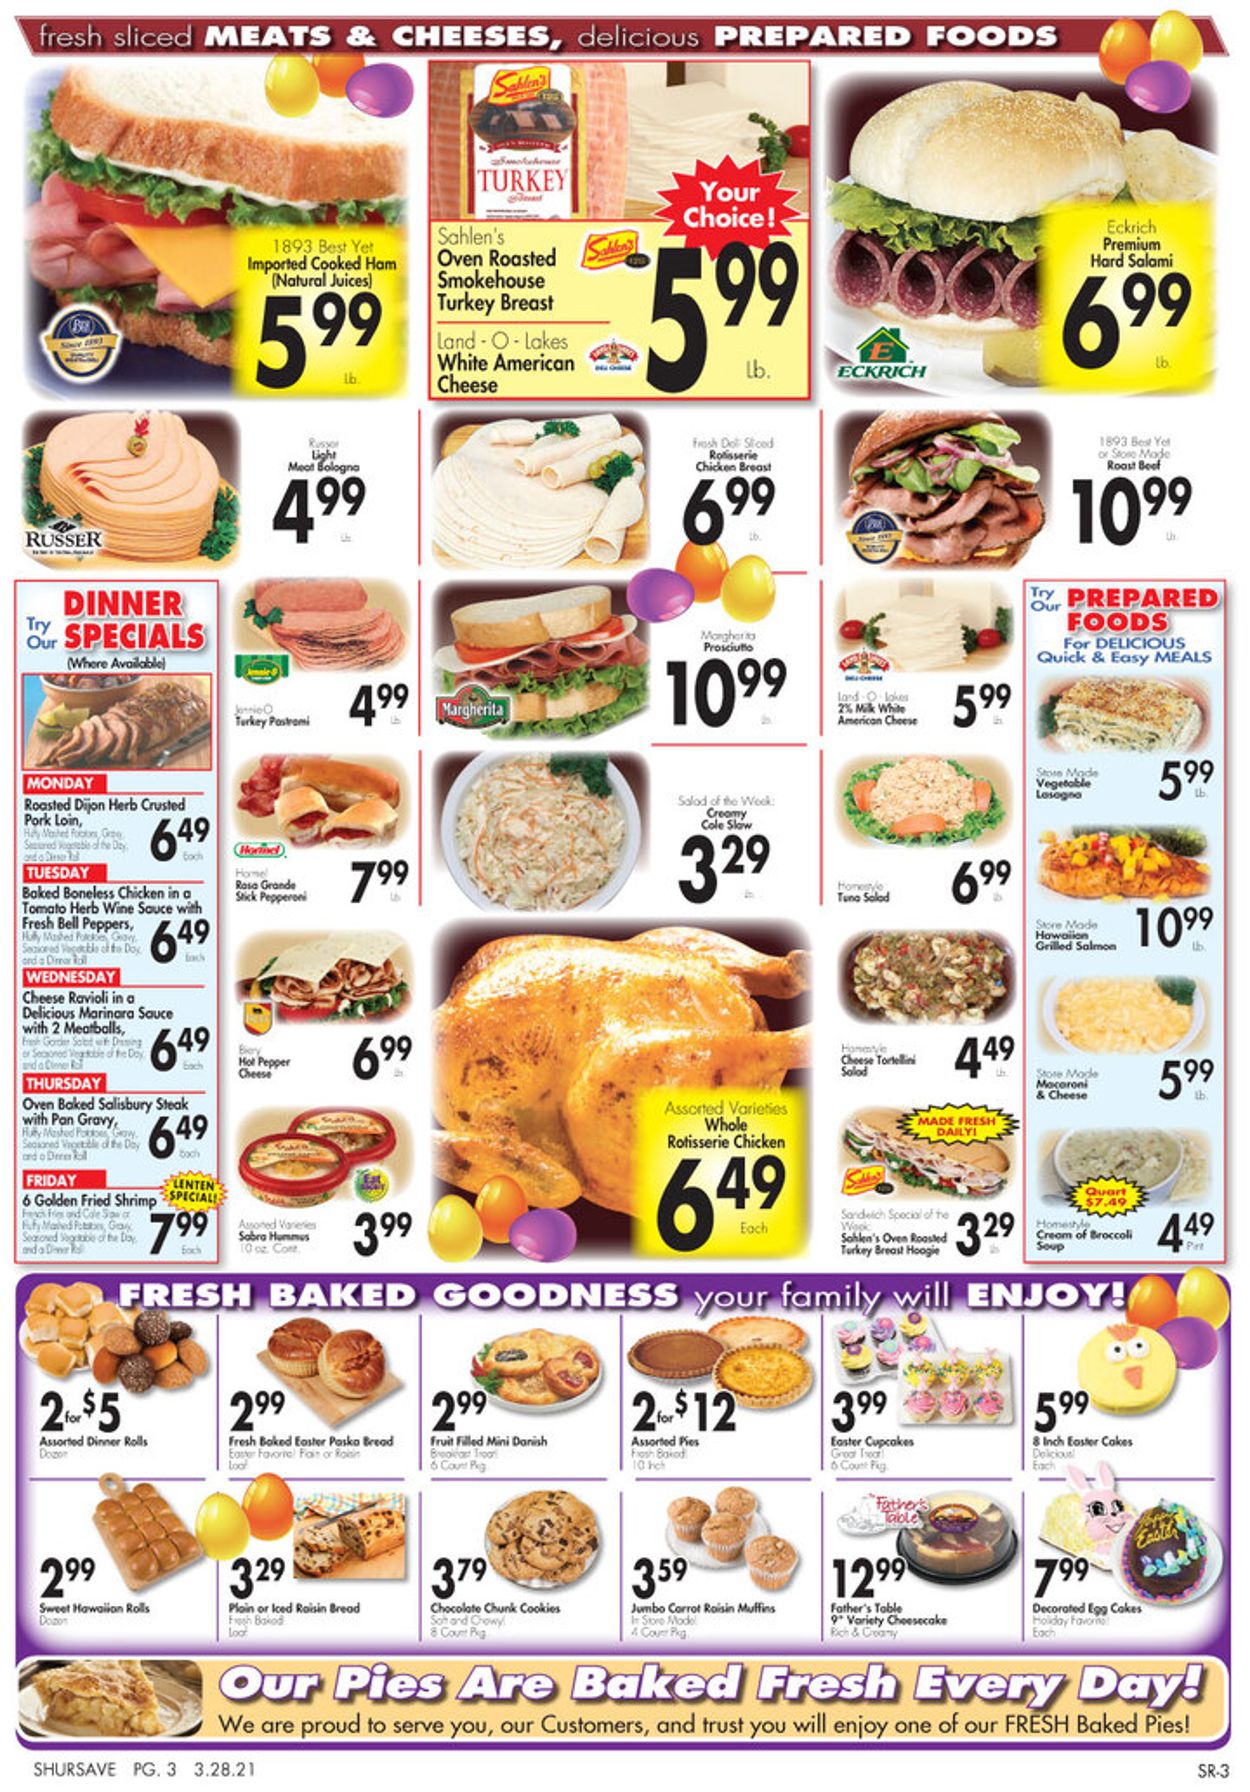 Gerrity's Supermarkets - Easter 2021 ad Weekly Ad Circular - valid 03/28-04/03/2021 (Page 4)